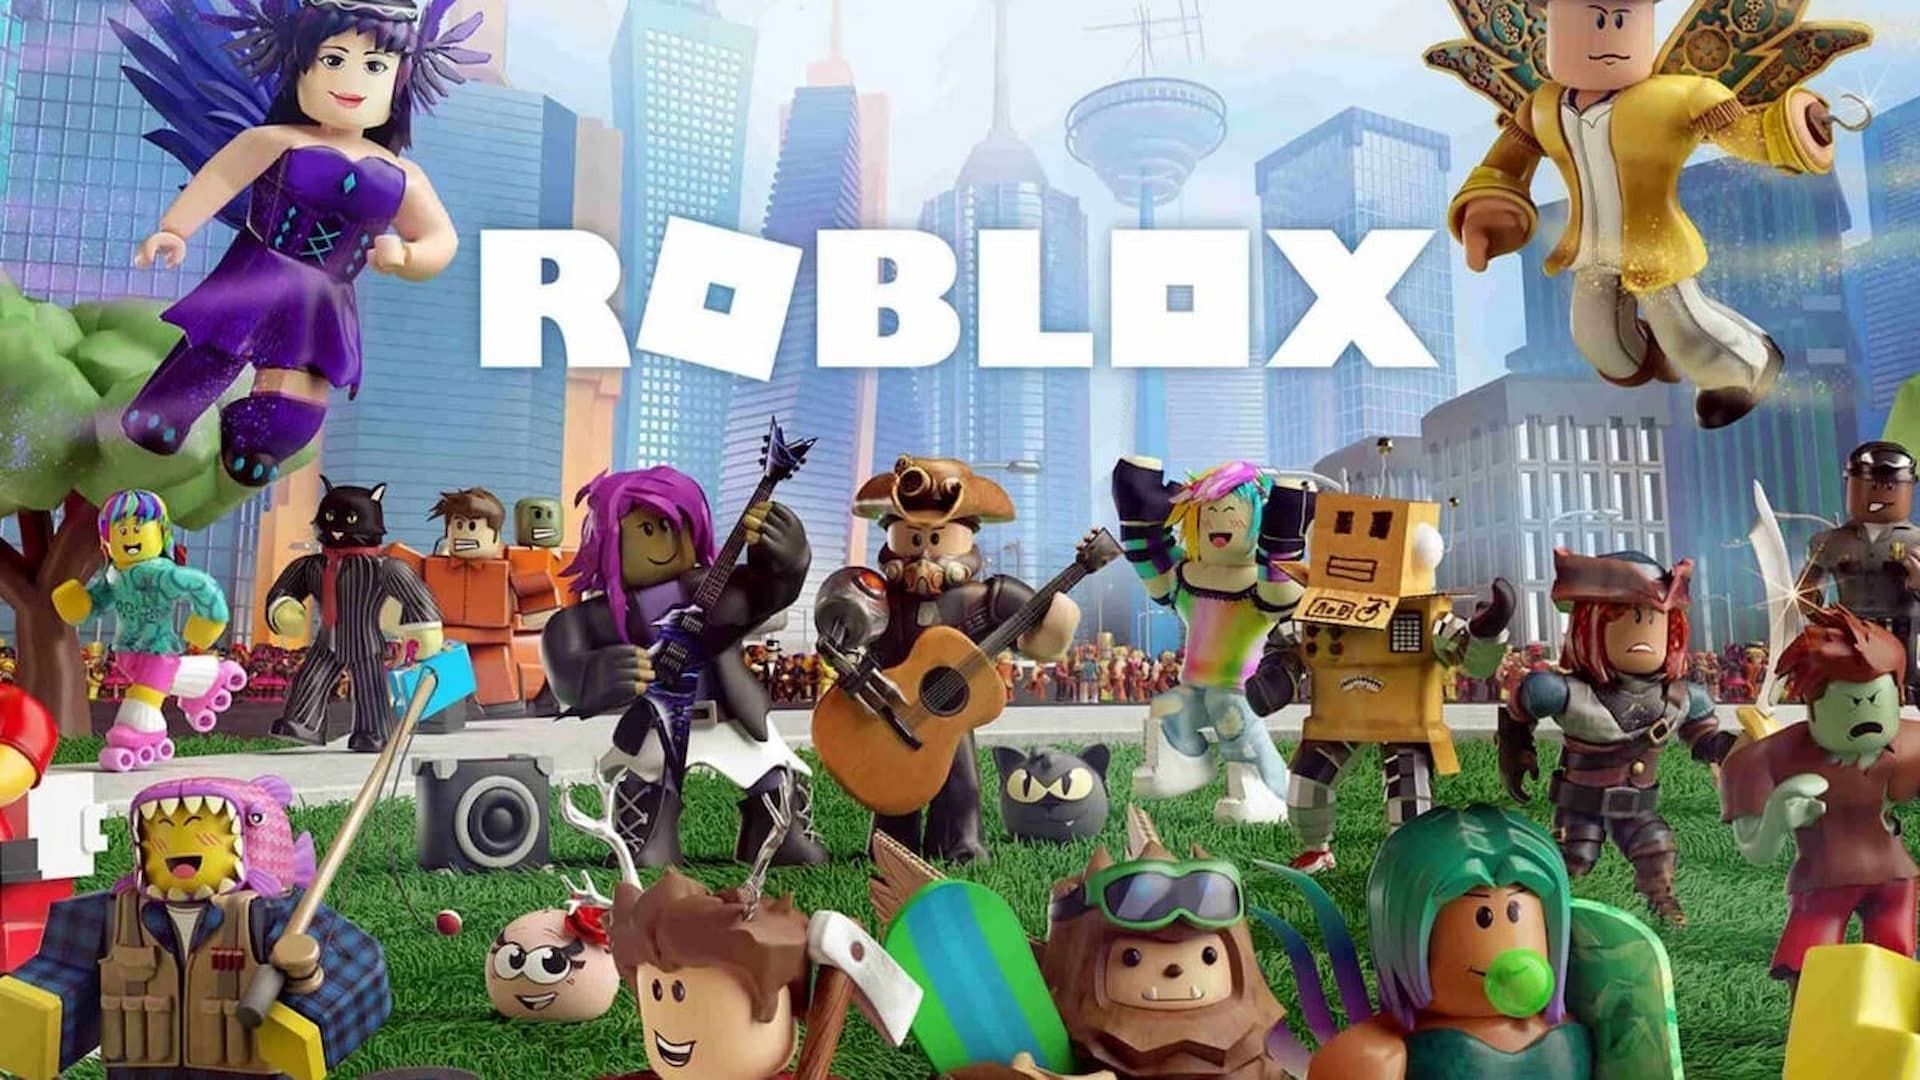 🟢 Roblox *FINALLY* Out on PlayStation! (Full Review) 